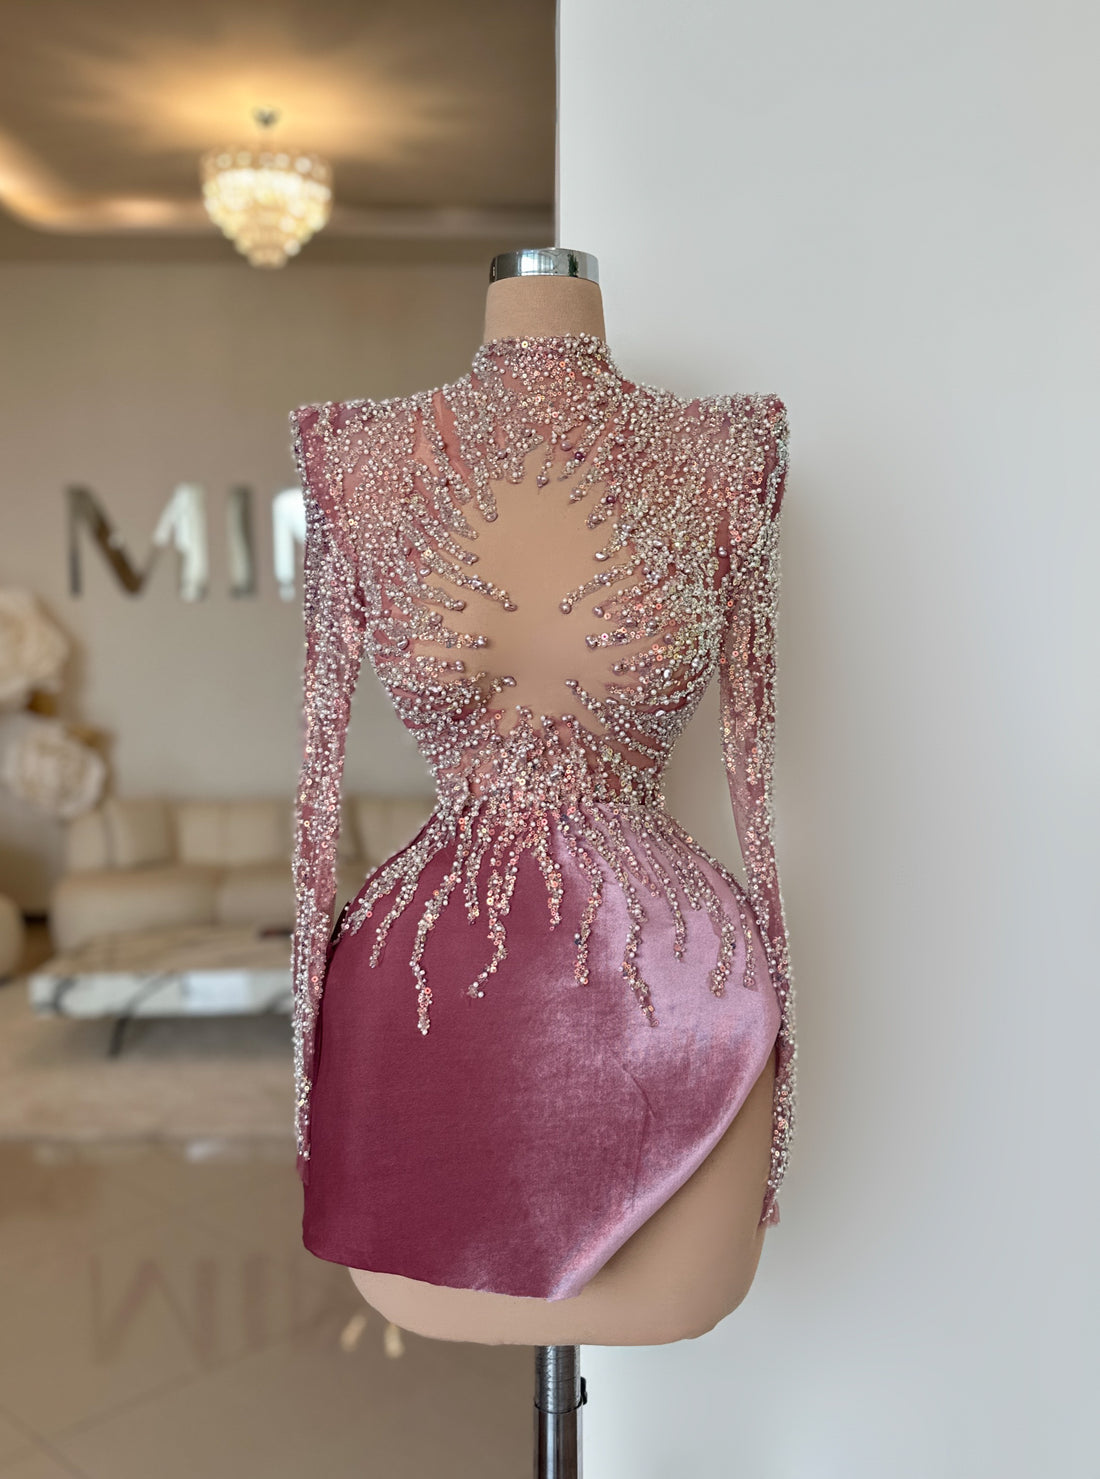 A short, revealing pink dress with crystals on a doll